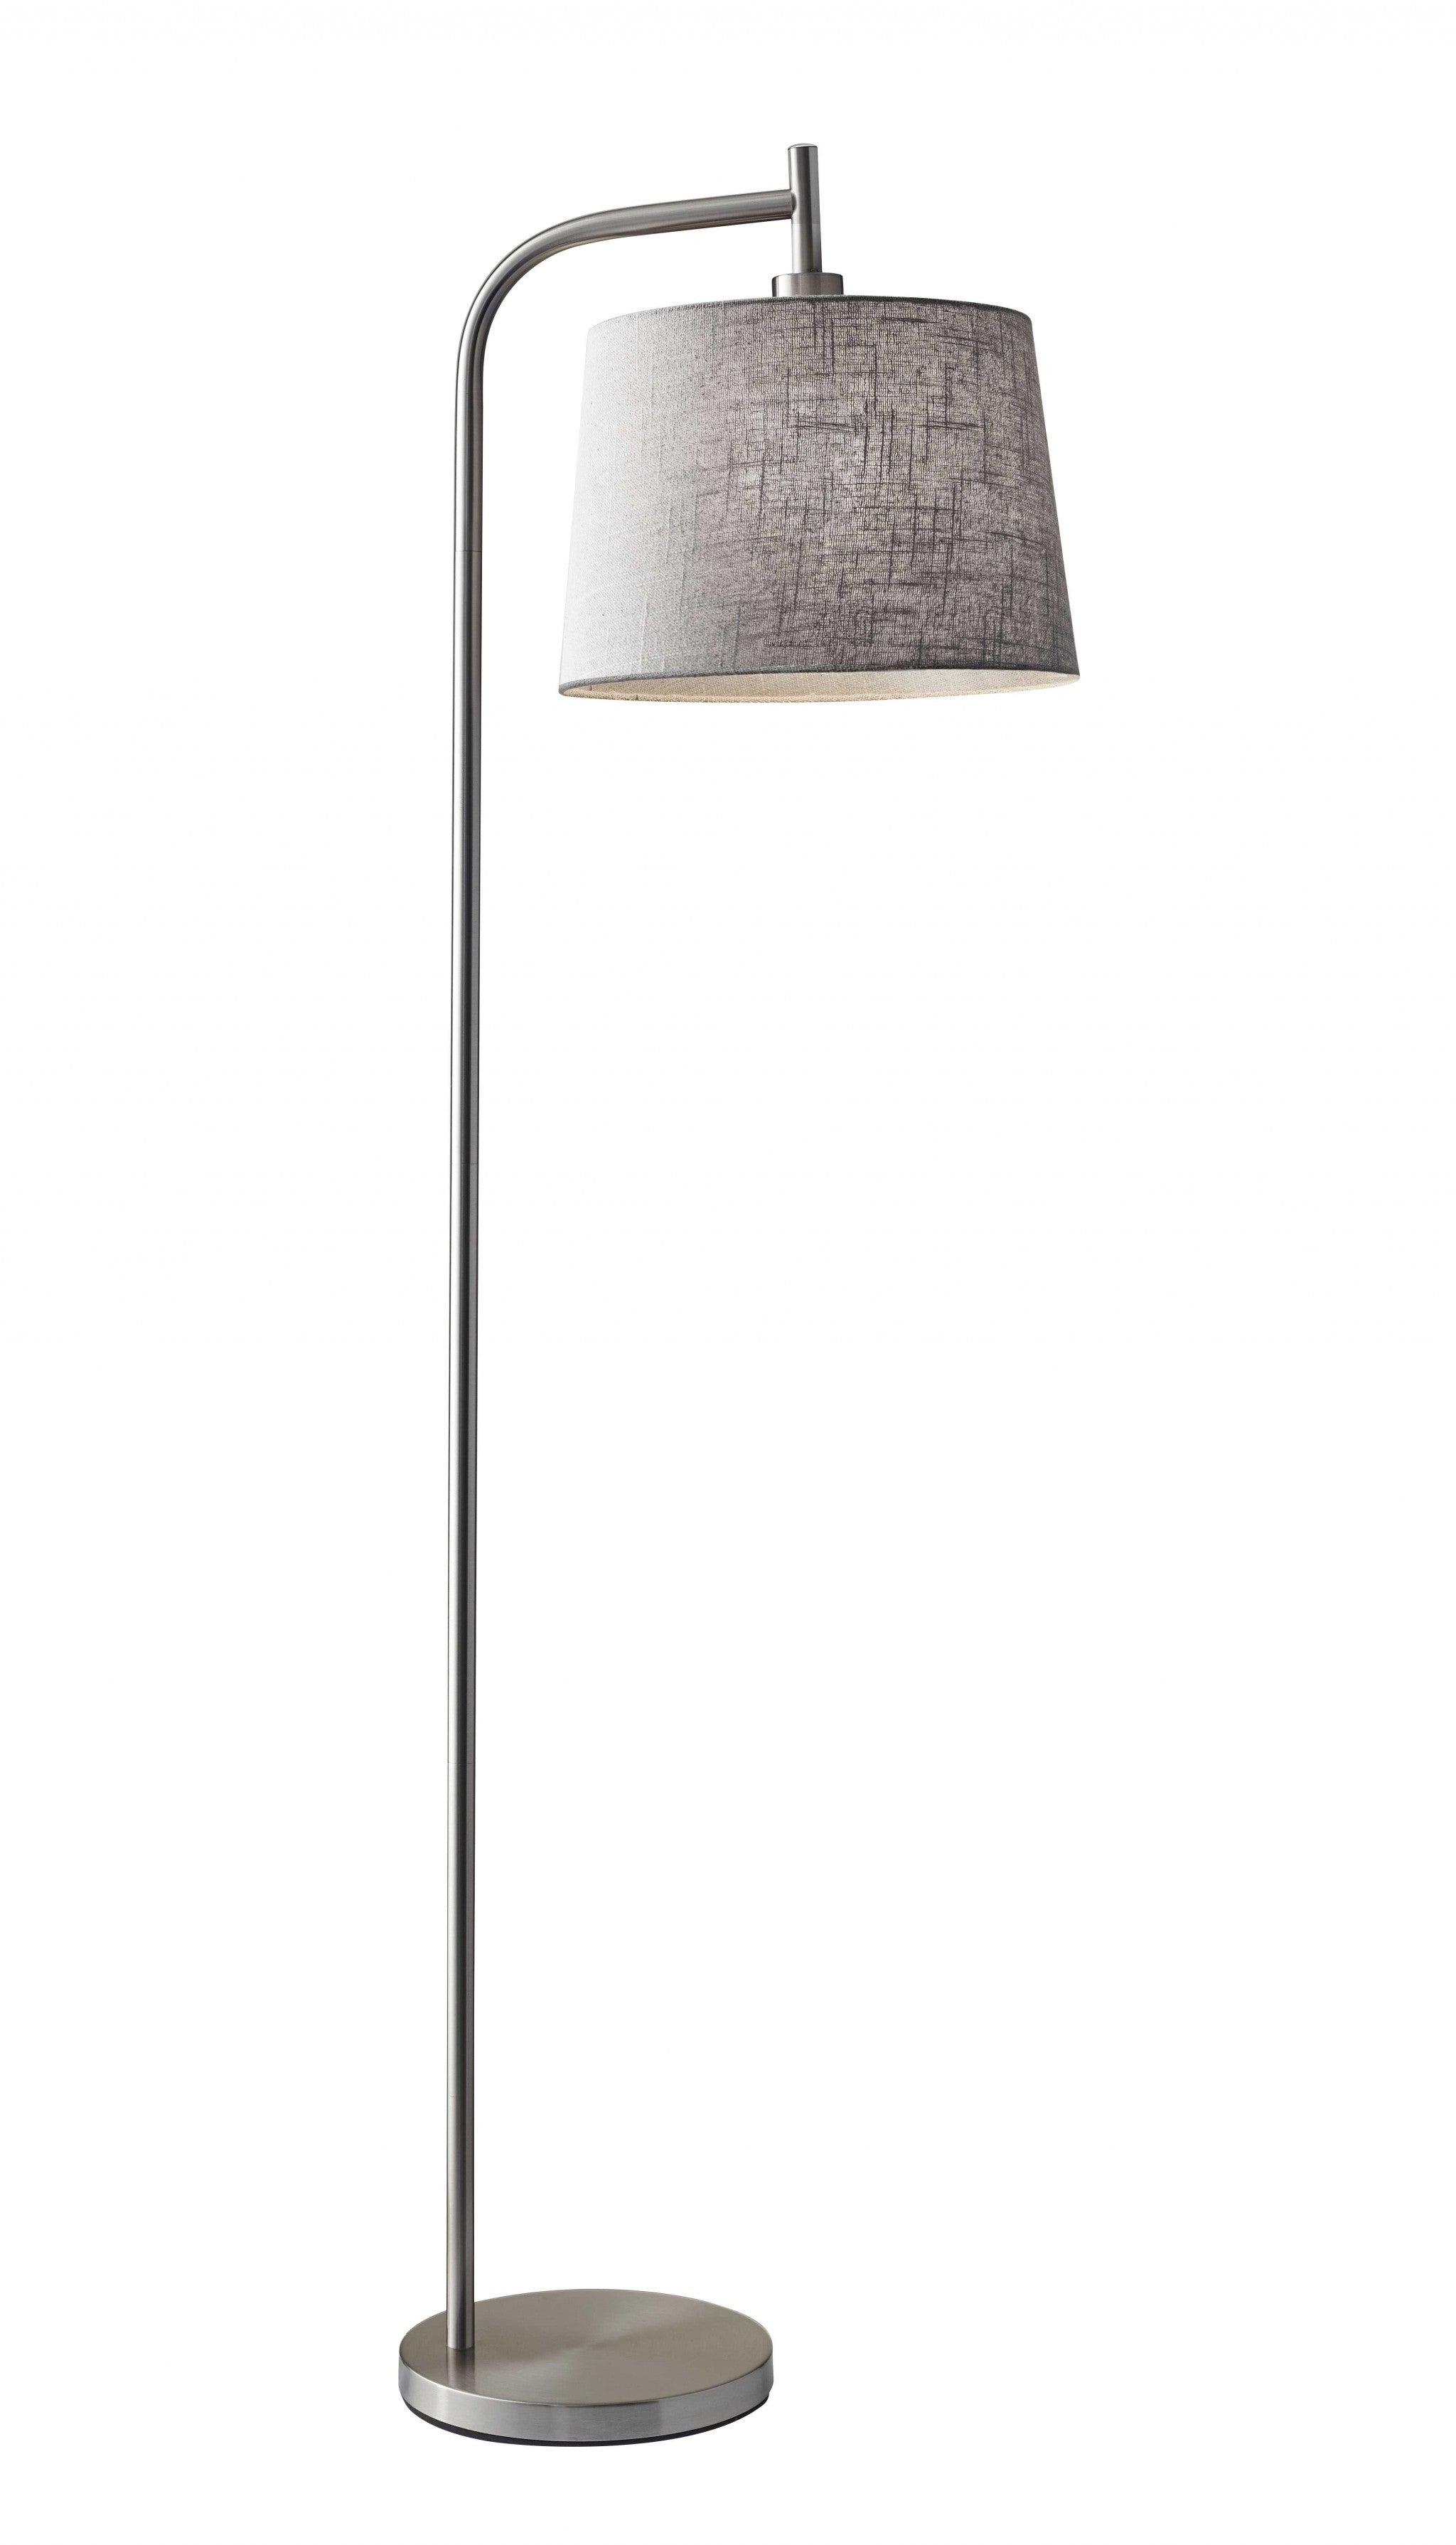 58" Swing Arm Floor Lamp With Gray Drum Shade